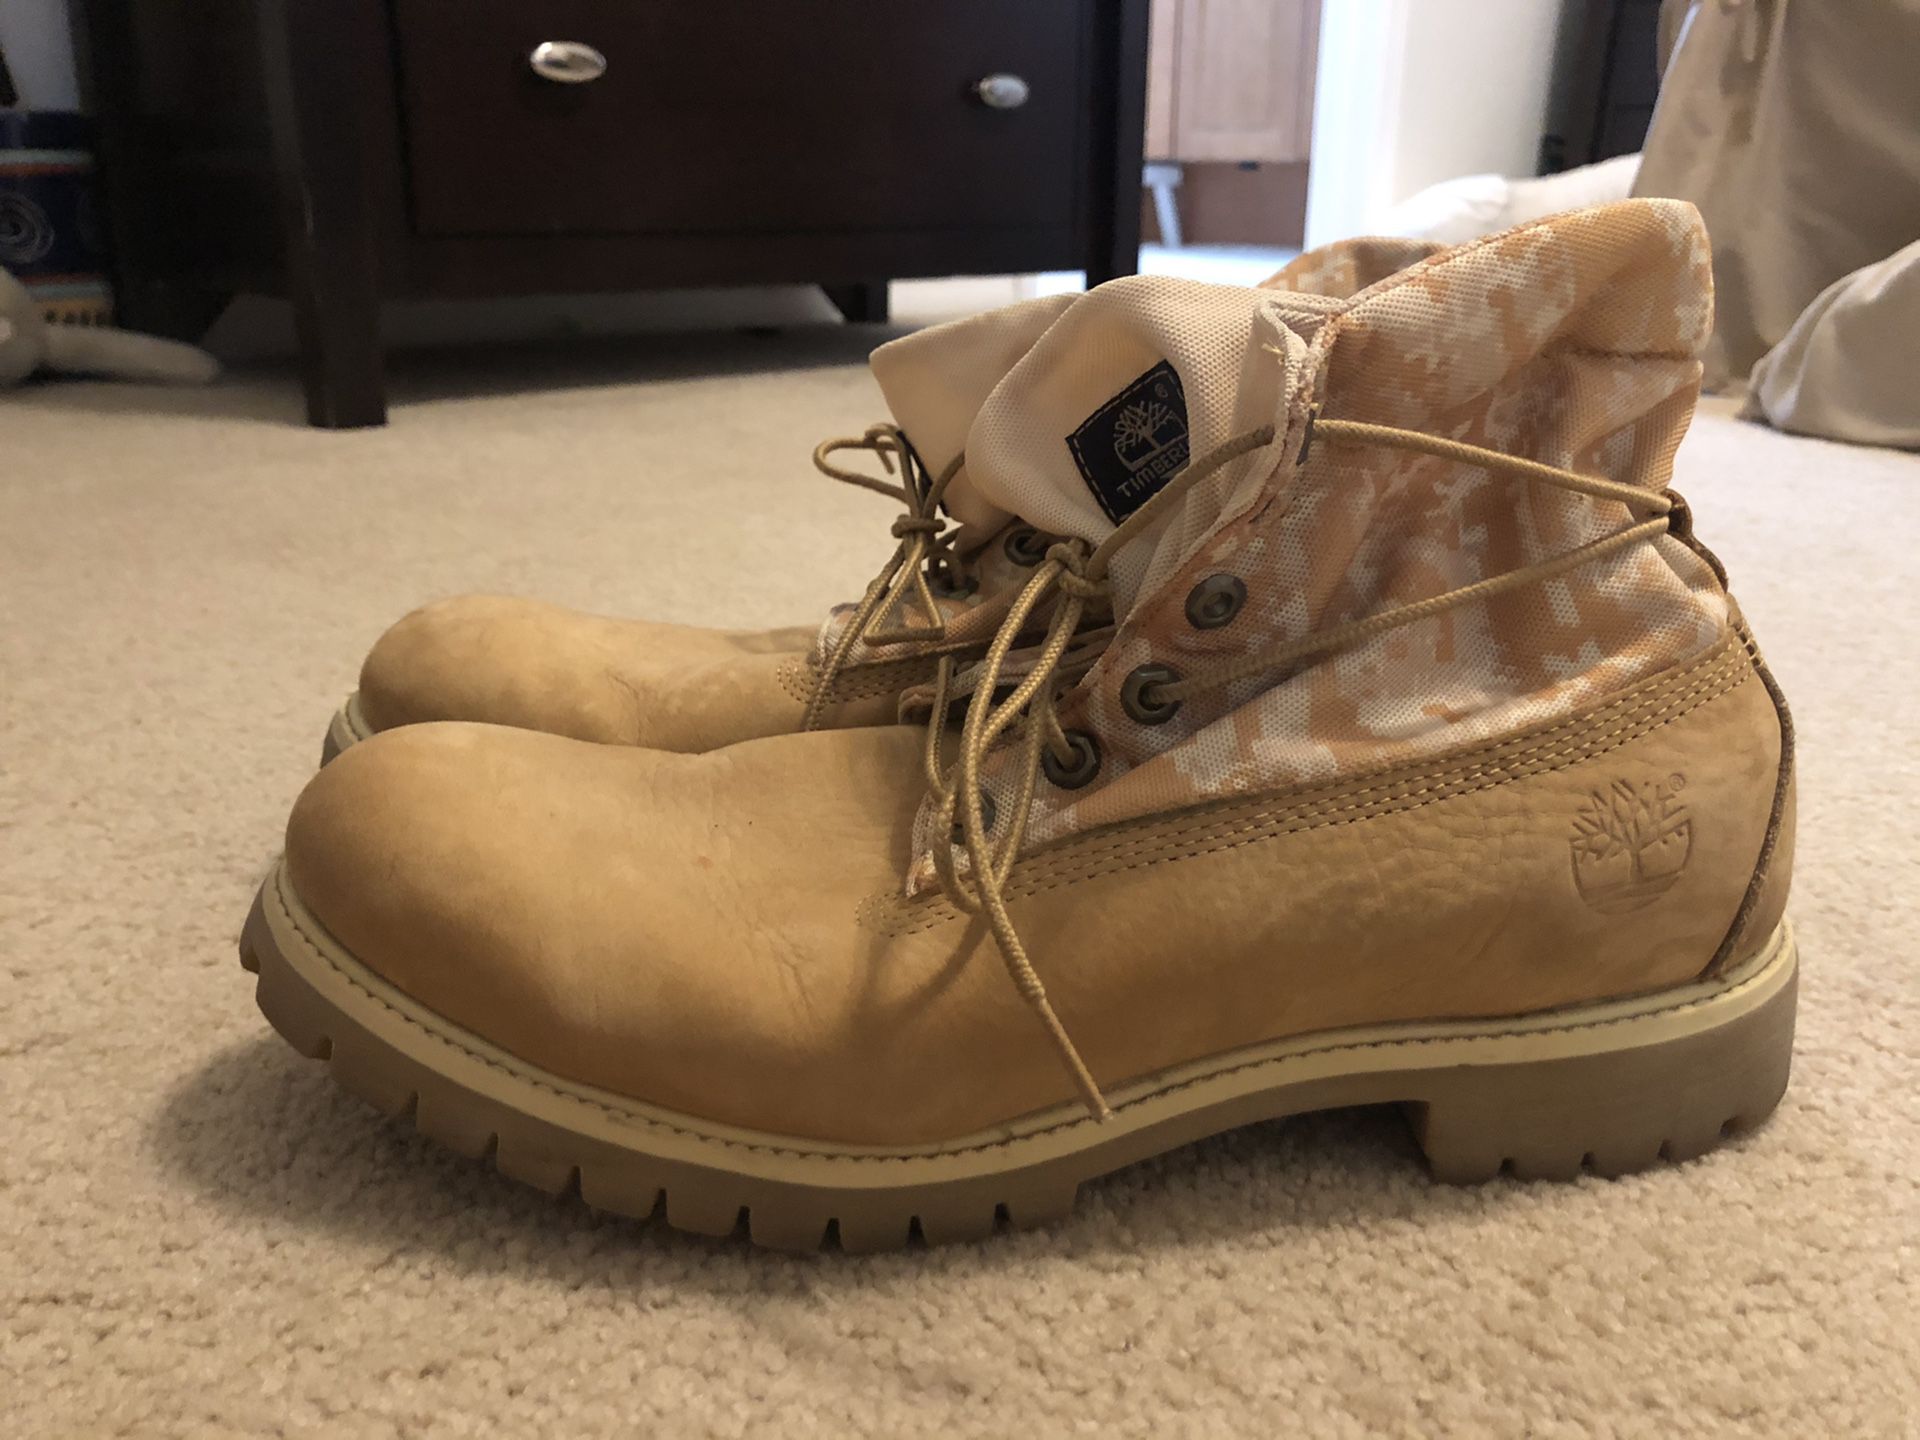 Men’s Timberland Boots size 11.5